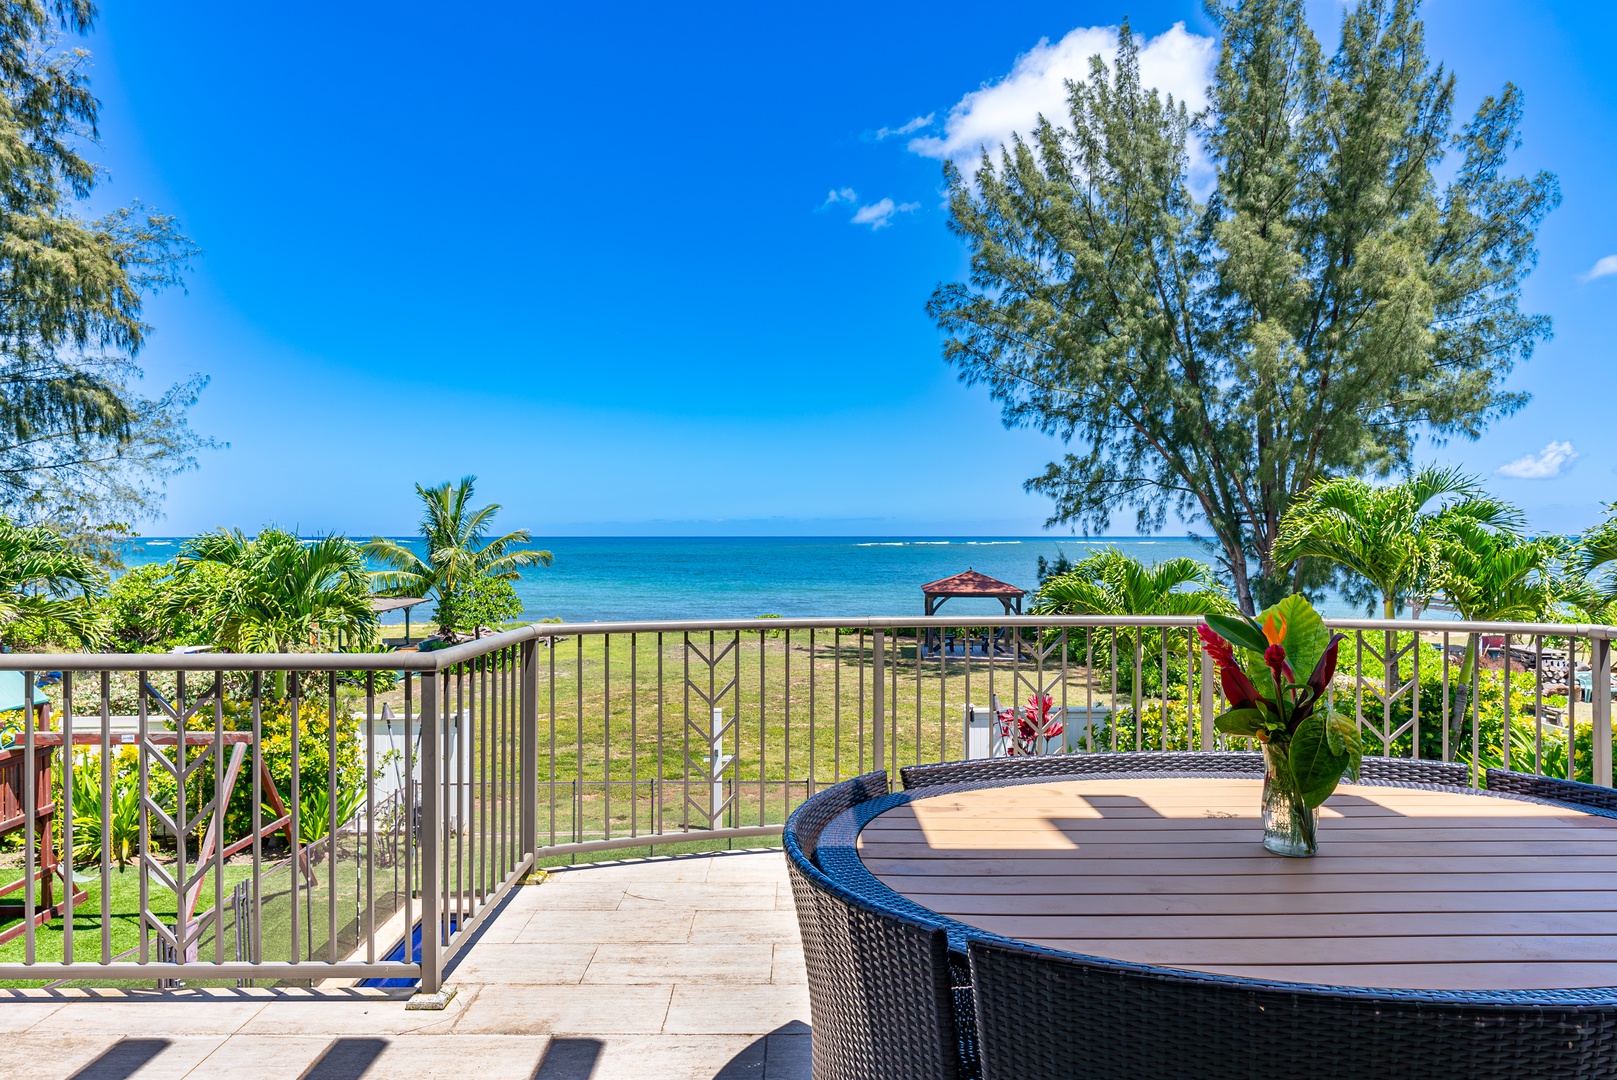 Waialua Vacation Rentals, Kala'iku Estate - Sip your coffee on the deck complimentary with one of the most beautiful Ocean Views